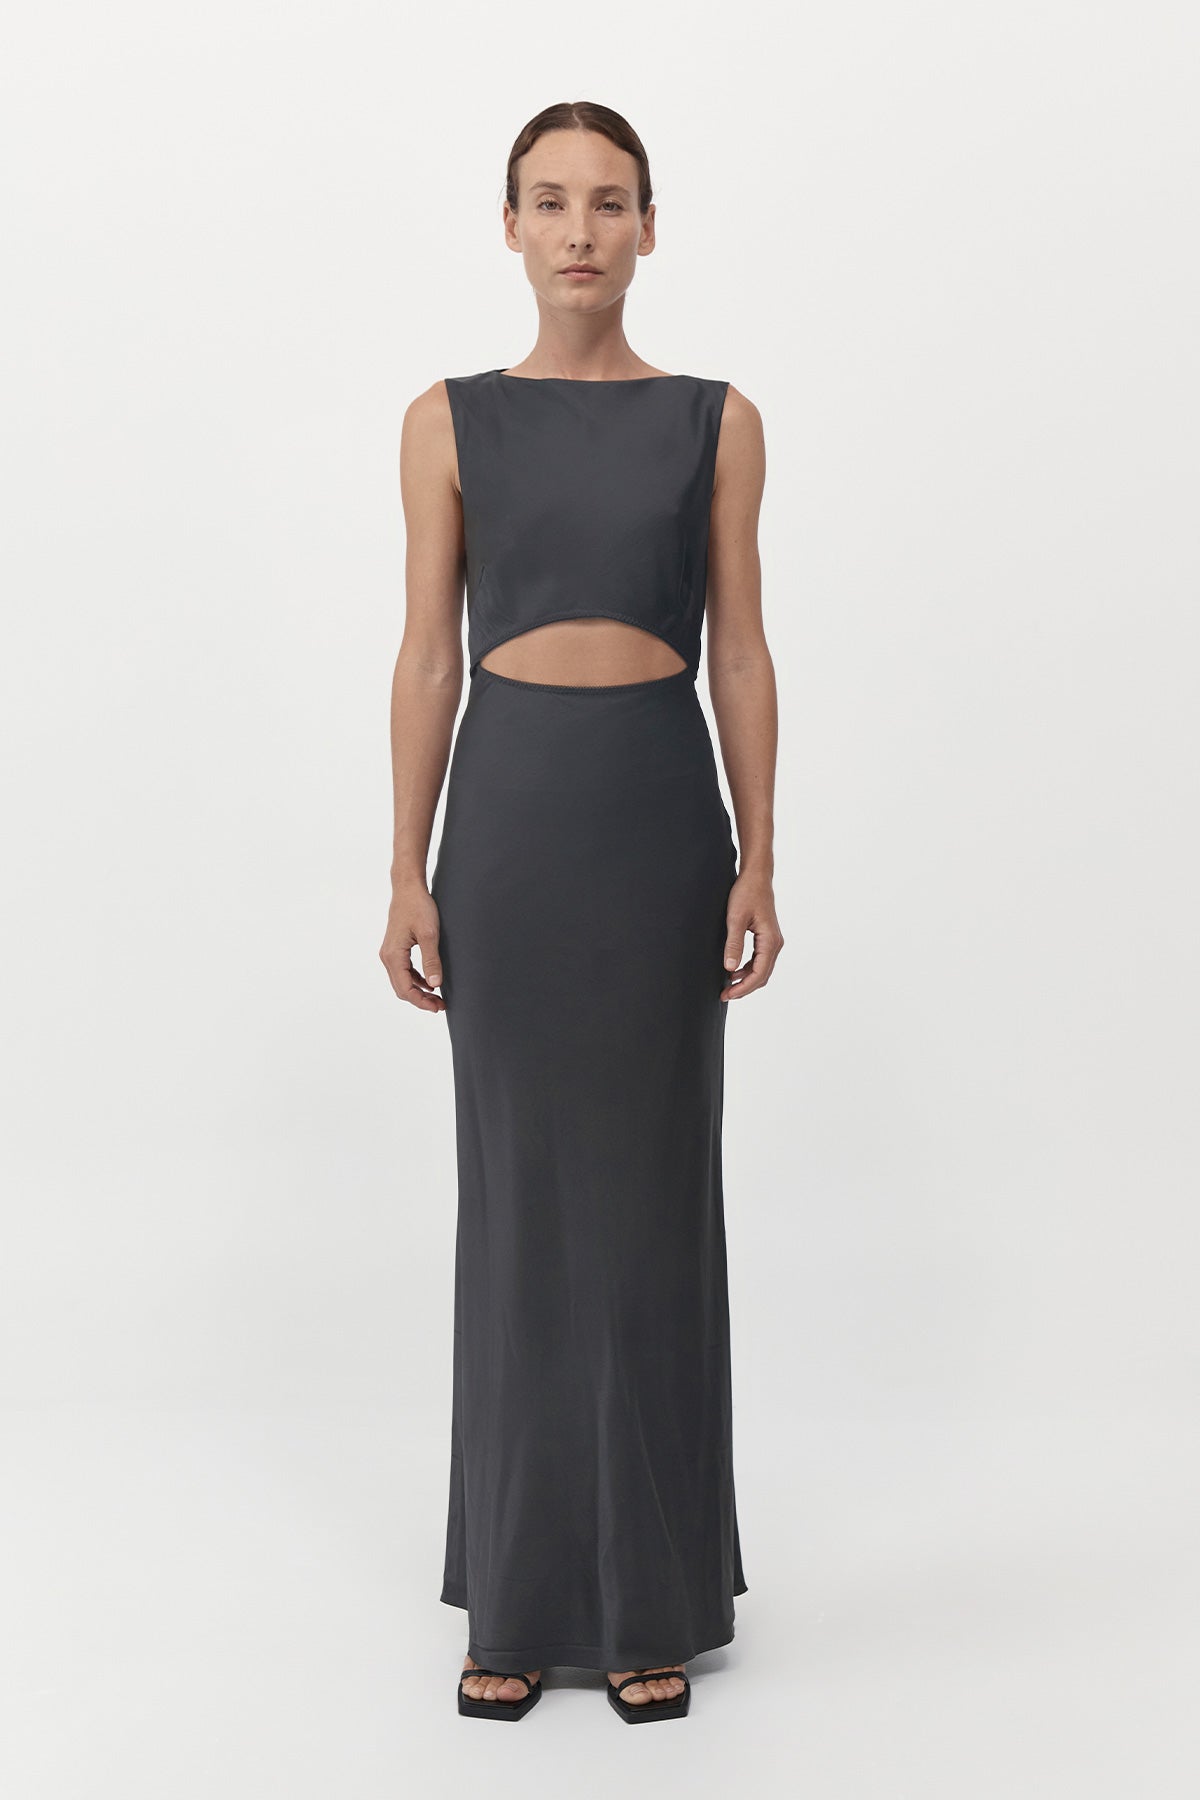 St Agni Soft Silk Cut Out Dress in Washed Black available at TNT The New Trend Australia